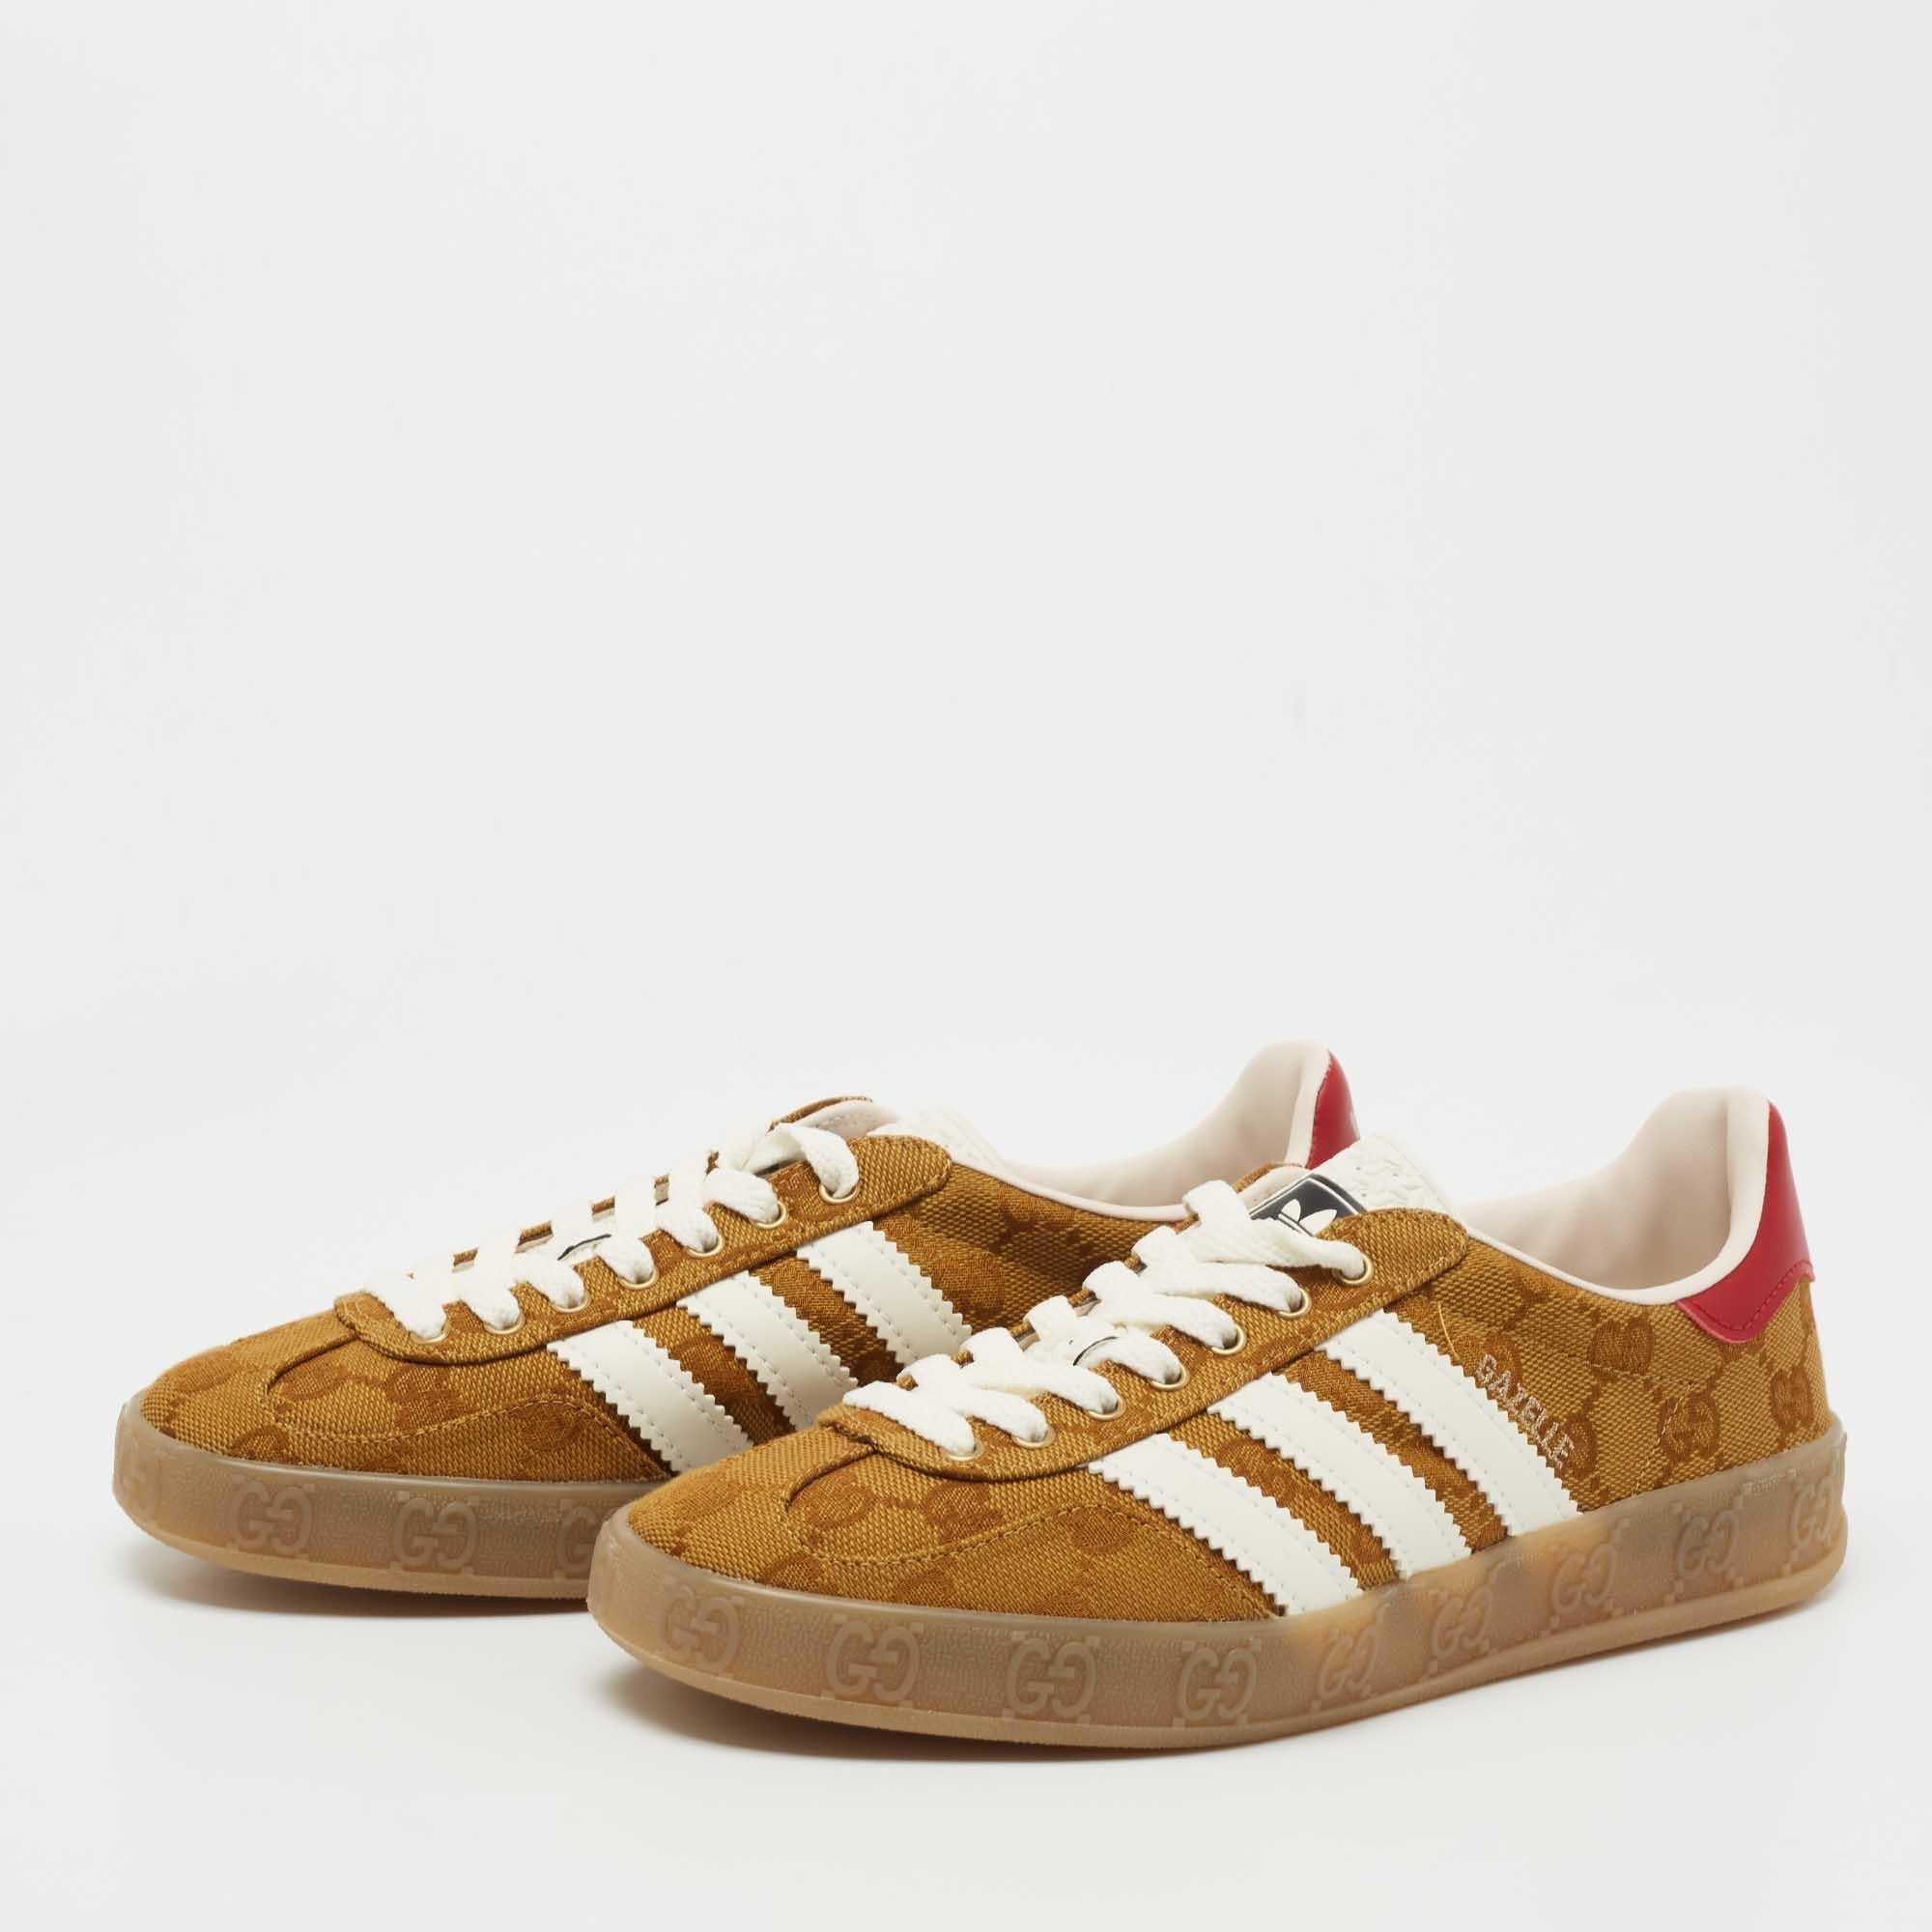 Adidas x Gucci Tricolor GG Canvas and Leather Gazelle Sneakers Size 36 4